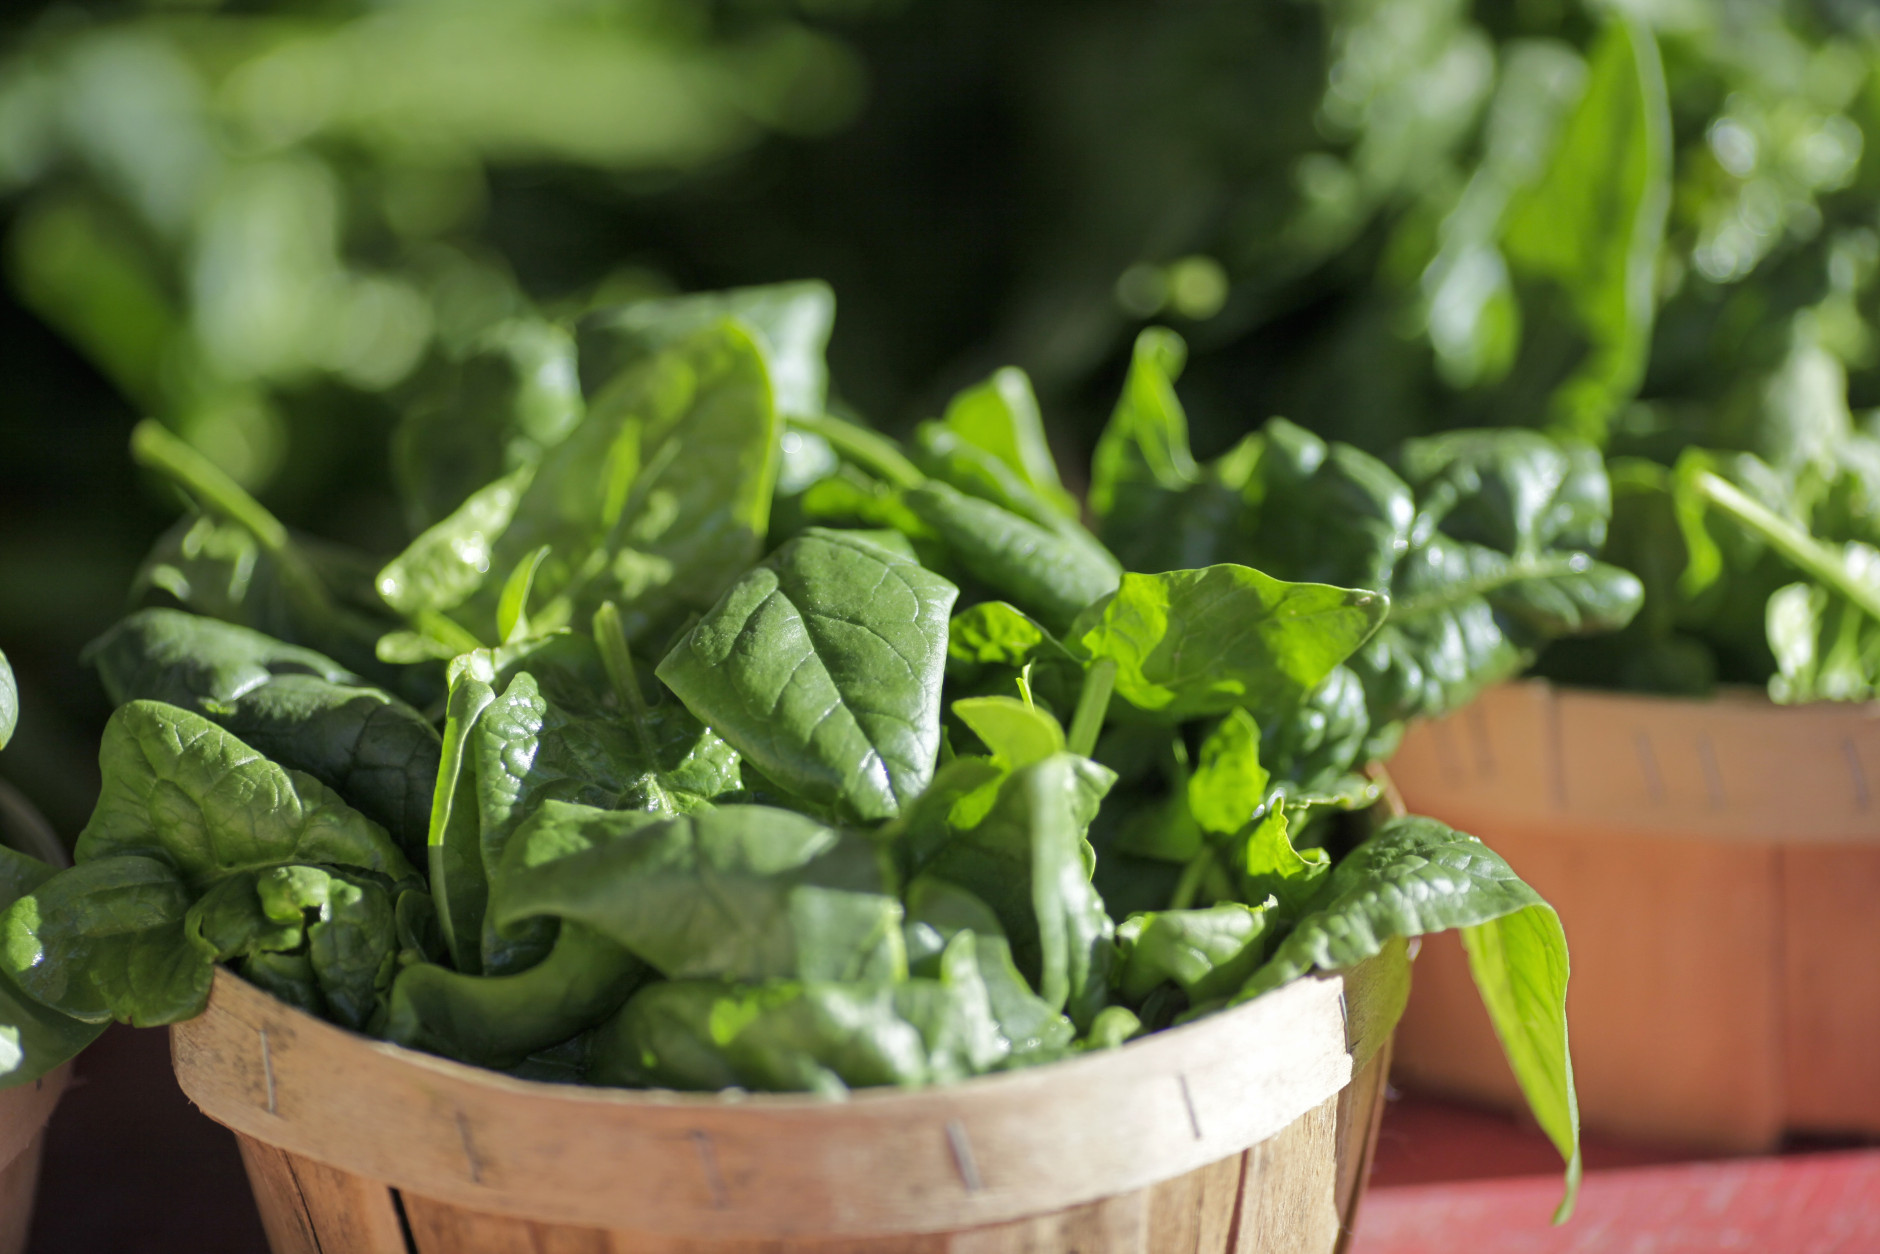 In this photo taken Jan. 2, 2016, baskets of organic spinach and other leafy greens are displayed for sale at a farmers market in Falls Church, Va. The Obama administration's latest dietary guidelines, released Thursday, Jan. 7, 2016, to help Americans reduce their likelihood of disease and obesity through a more healthful diet. The main message hasn't changed much over time: Eat your fruits and vegetables, whole grains and seafood, and keep sugar, fats and salt in moderation.  (AP Photo/J. Scott Applewhite)